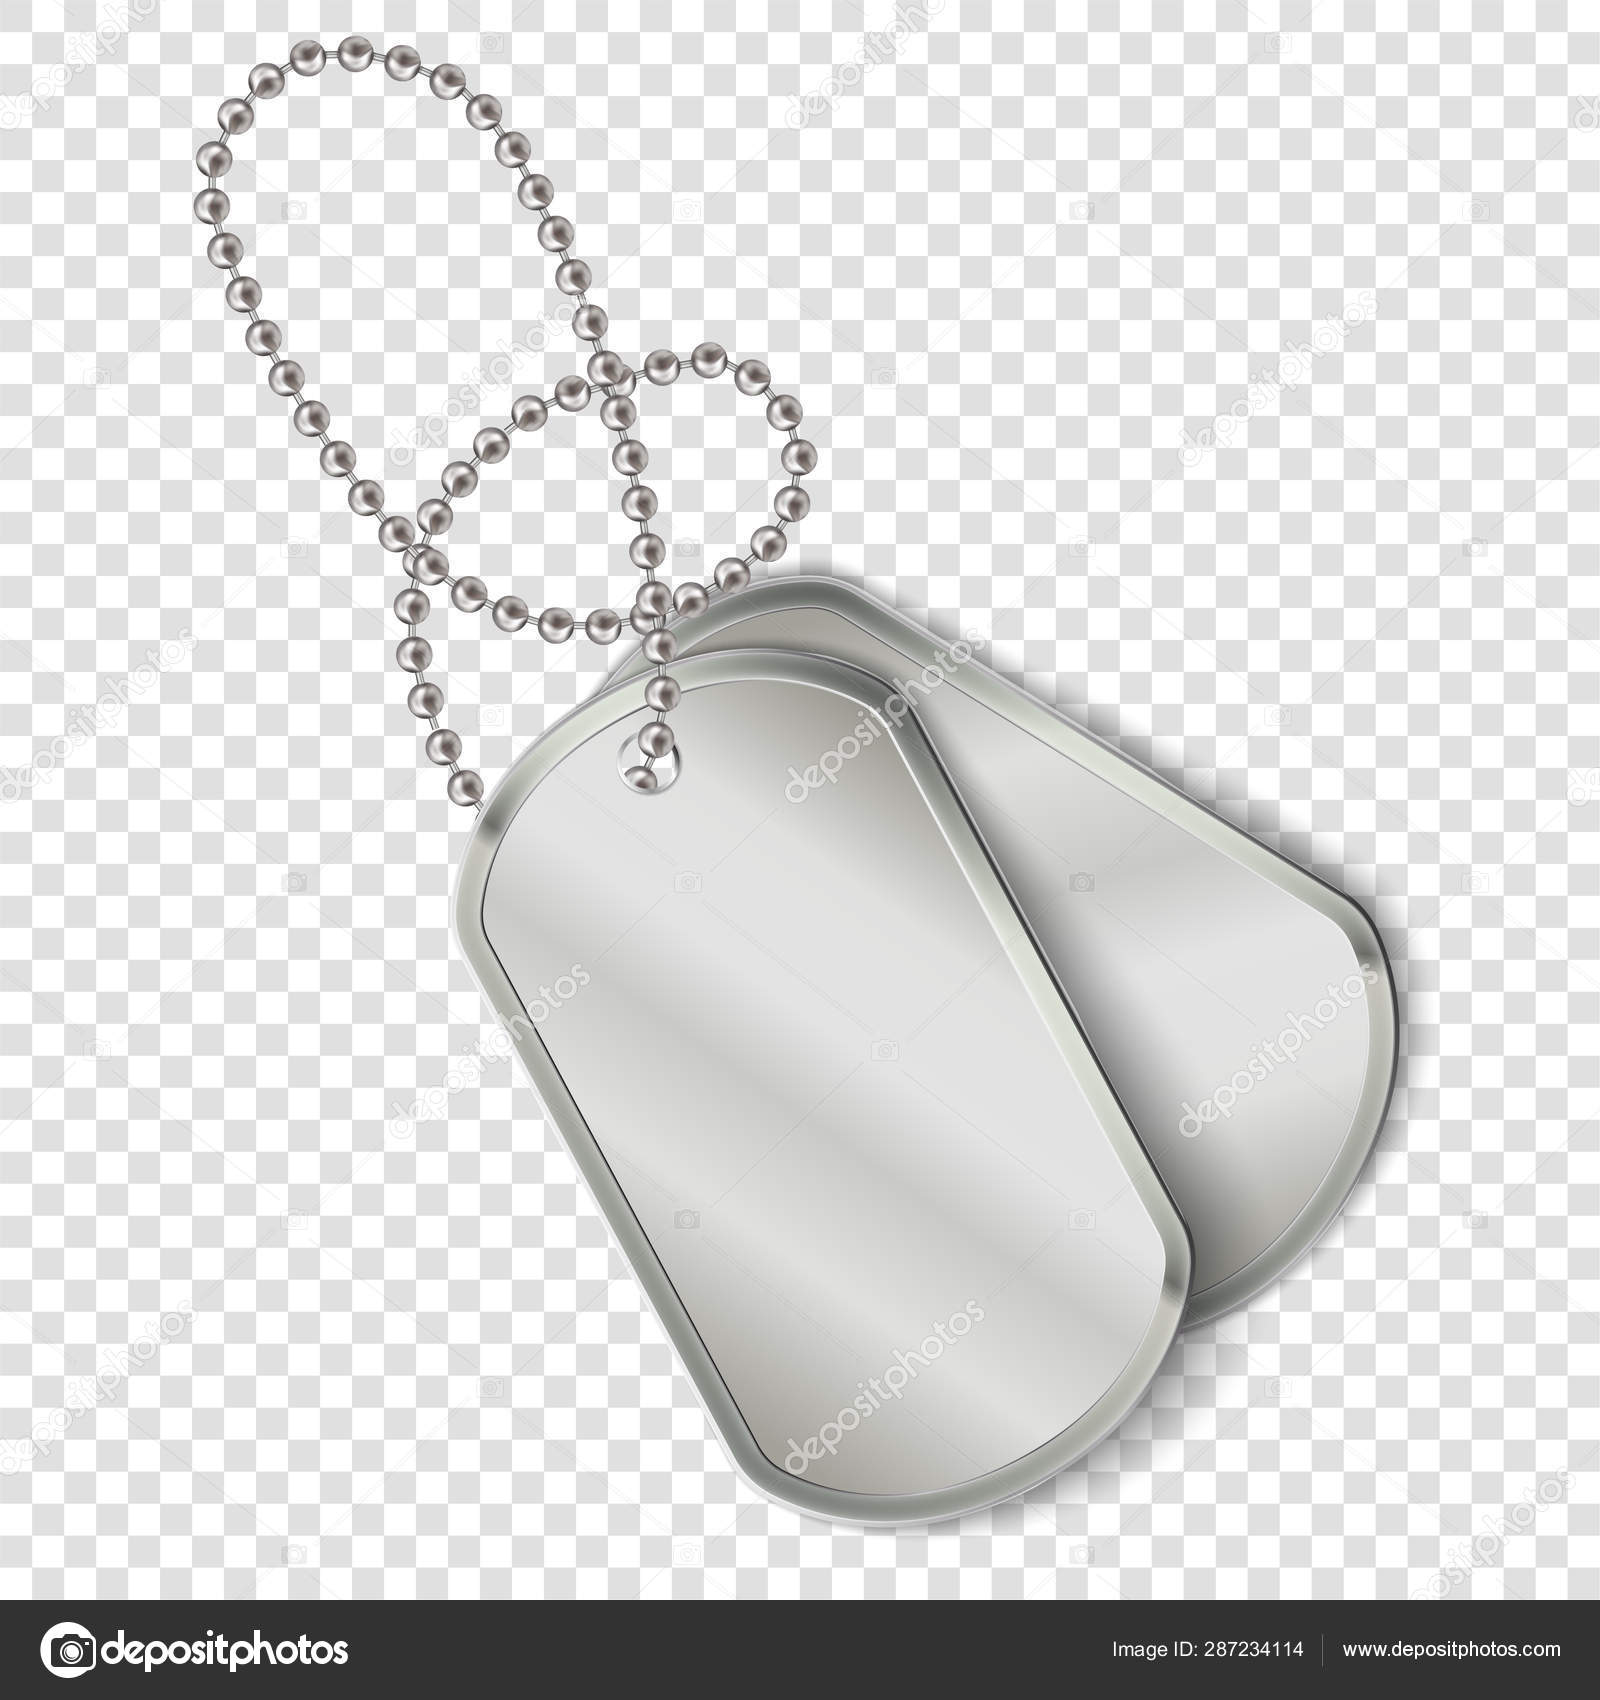 Vector Military Dog Tags on transparent background. Blank soldier